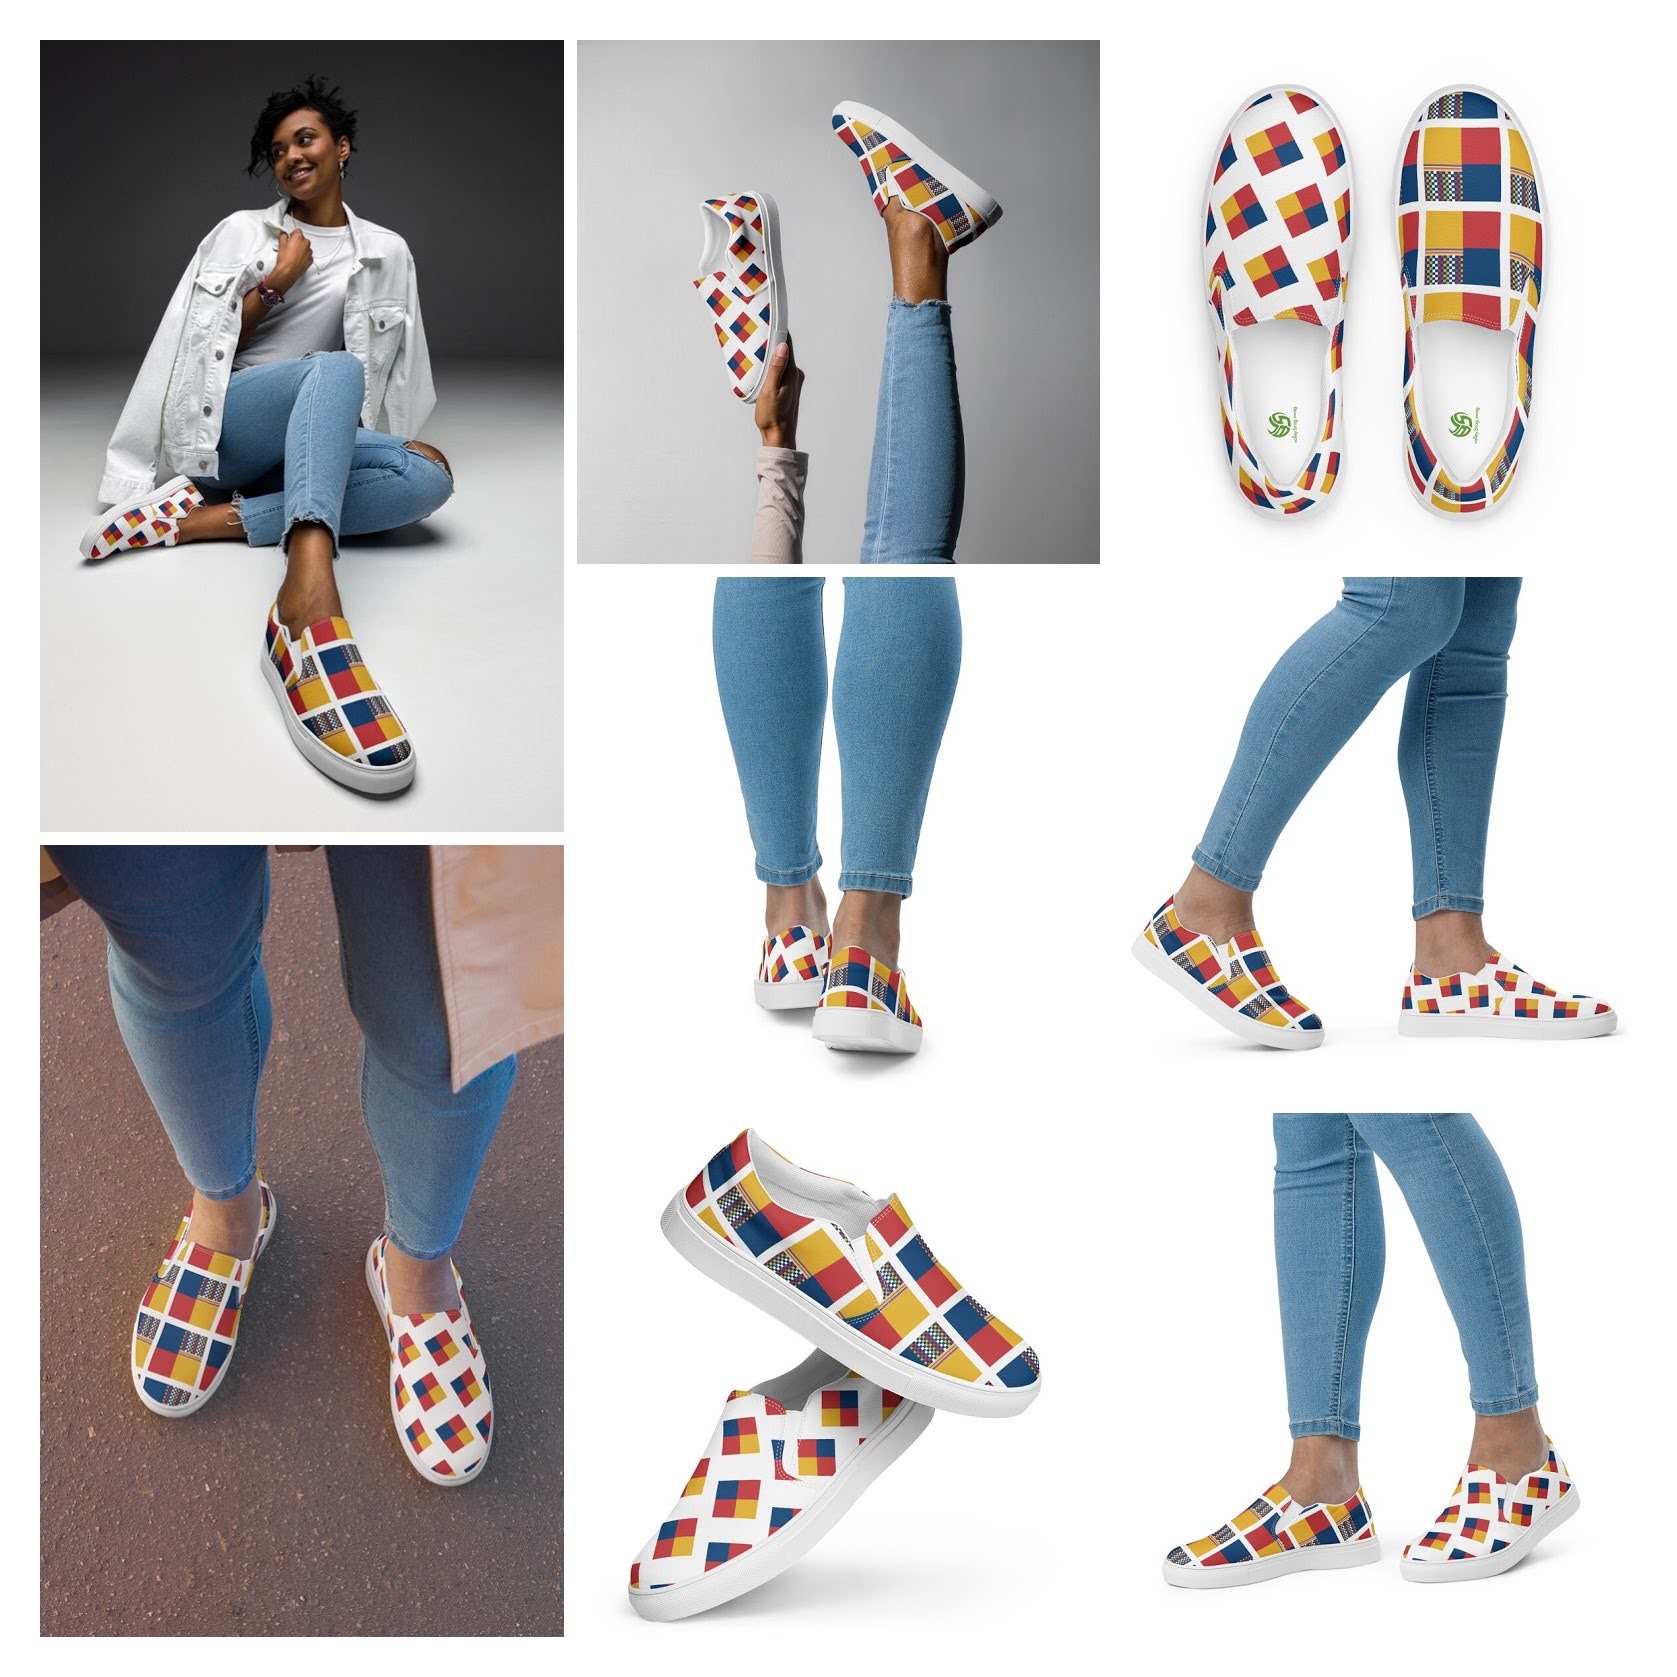 Here's where to begin your next cute, comfy, cool canvas slip on shoe obsession, featuring my newly designed mix and match kicks to wear to practice and games.